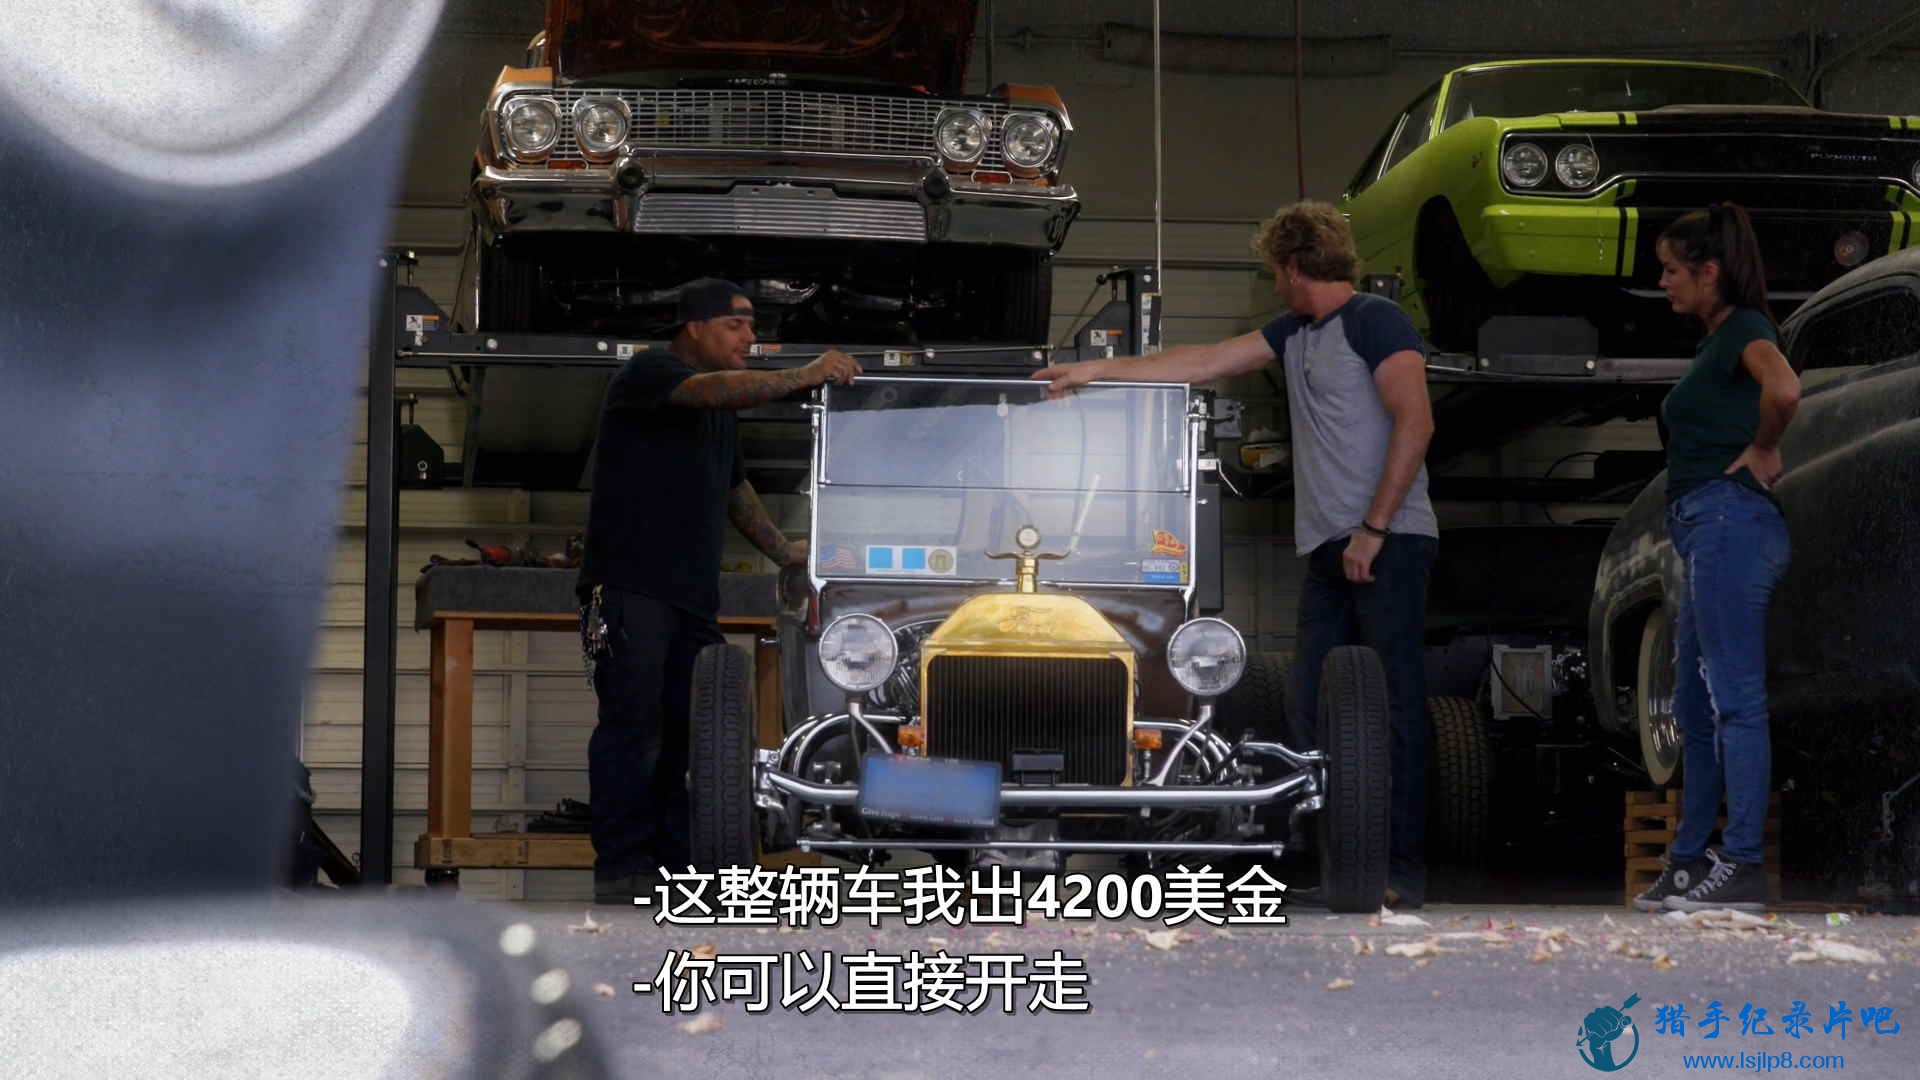 Car.Masters.Rust.to.Riches.S01E01.Outsmarted.1080p.NF.WEB-DL.DD 5.1.x264-AJP69.m.jpg